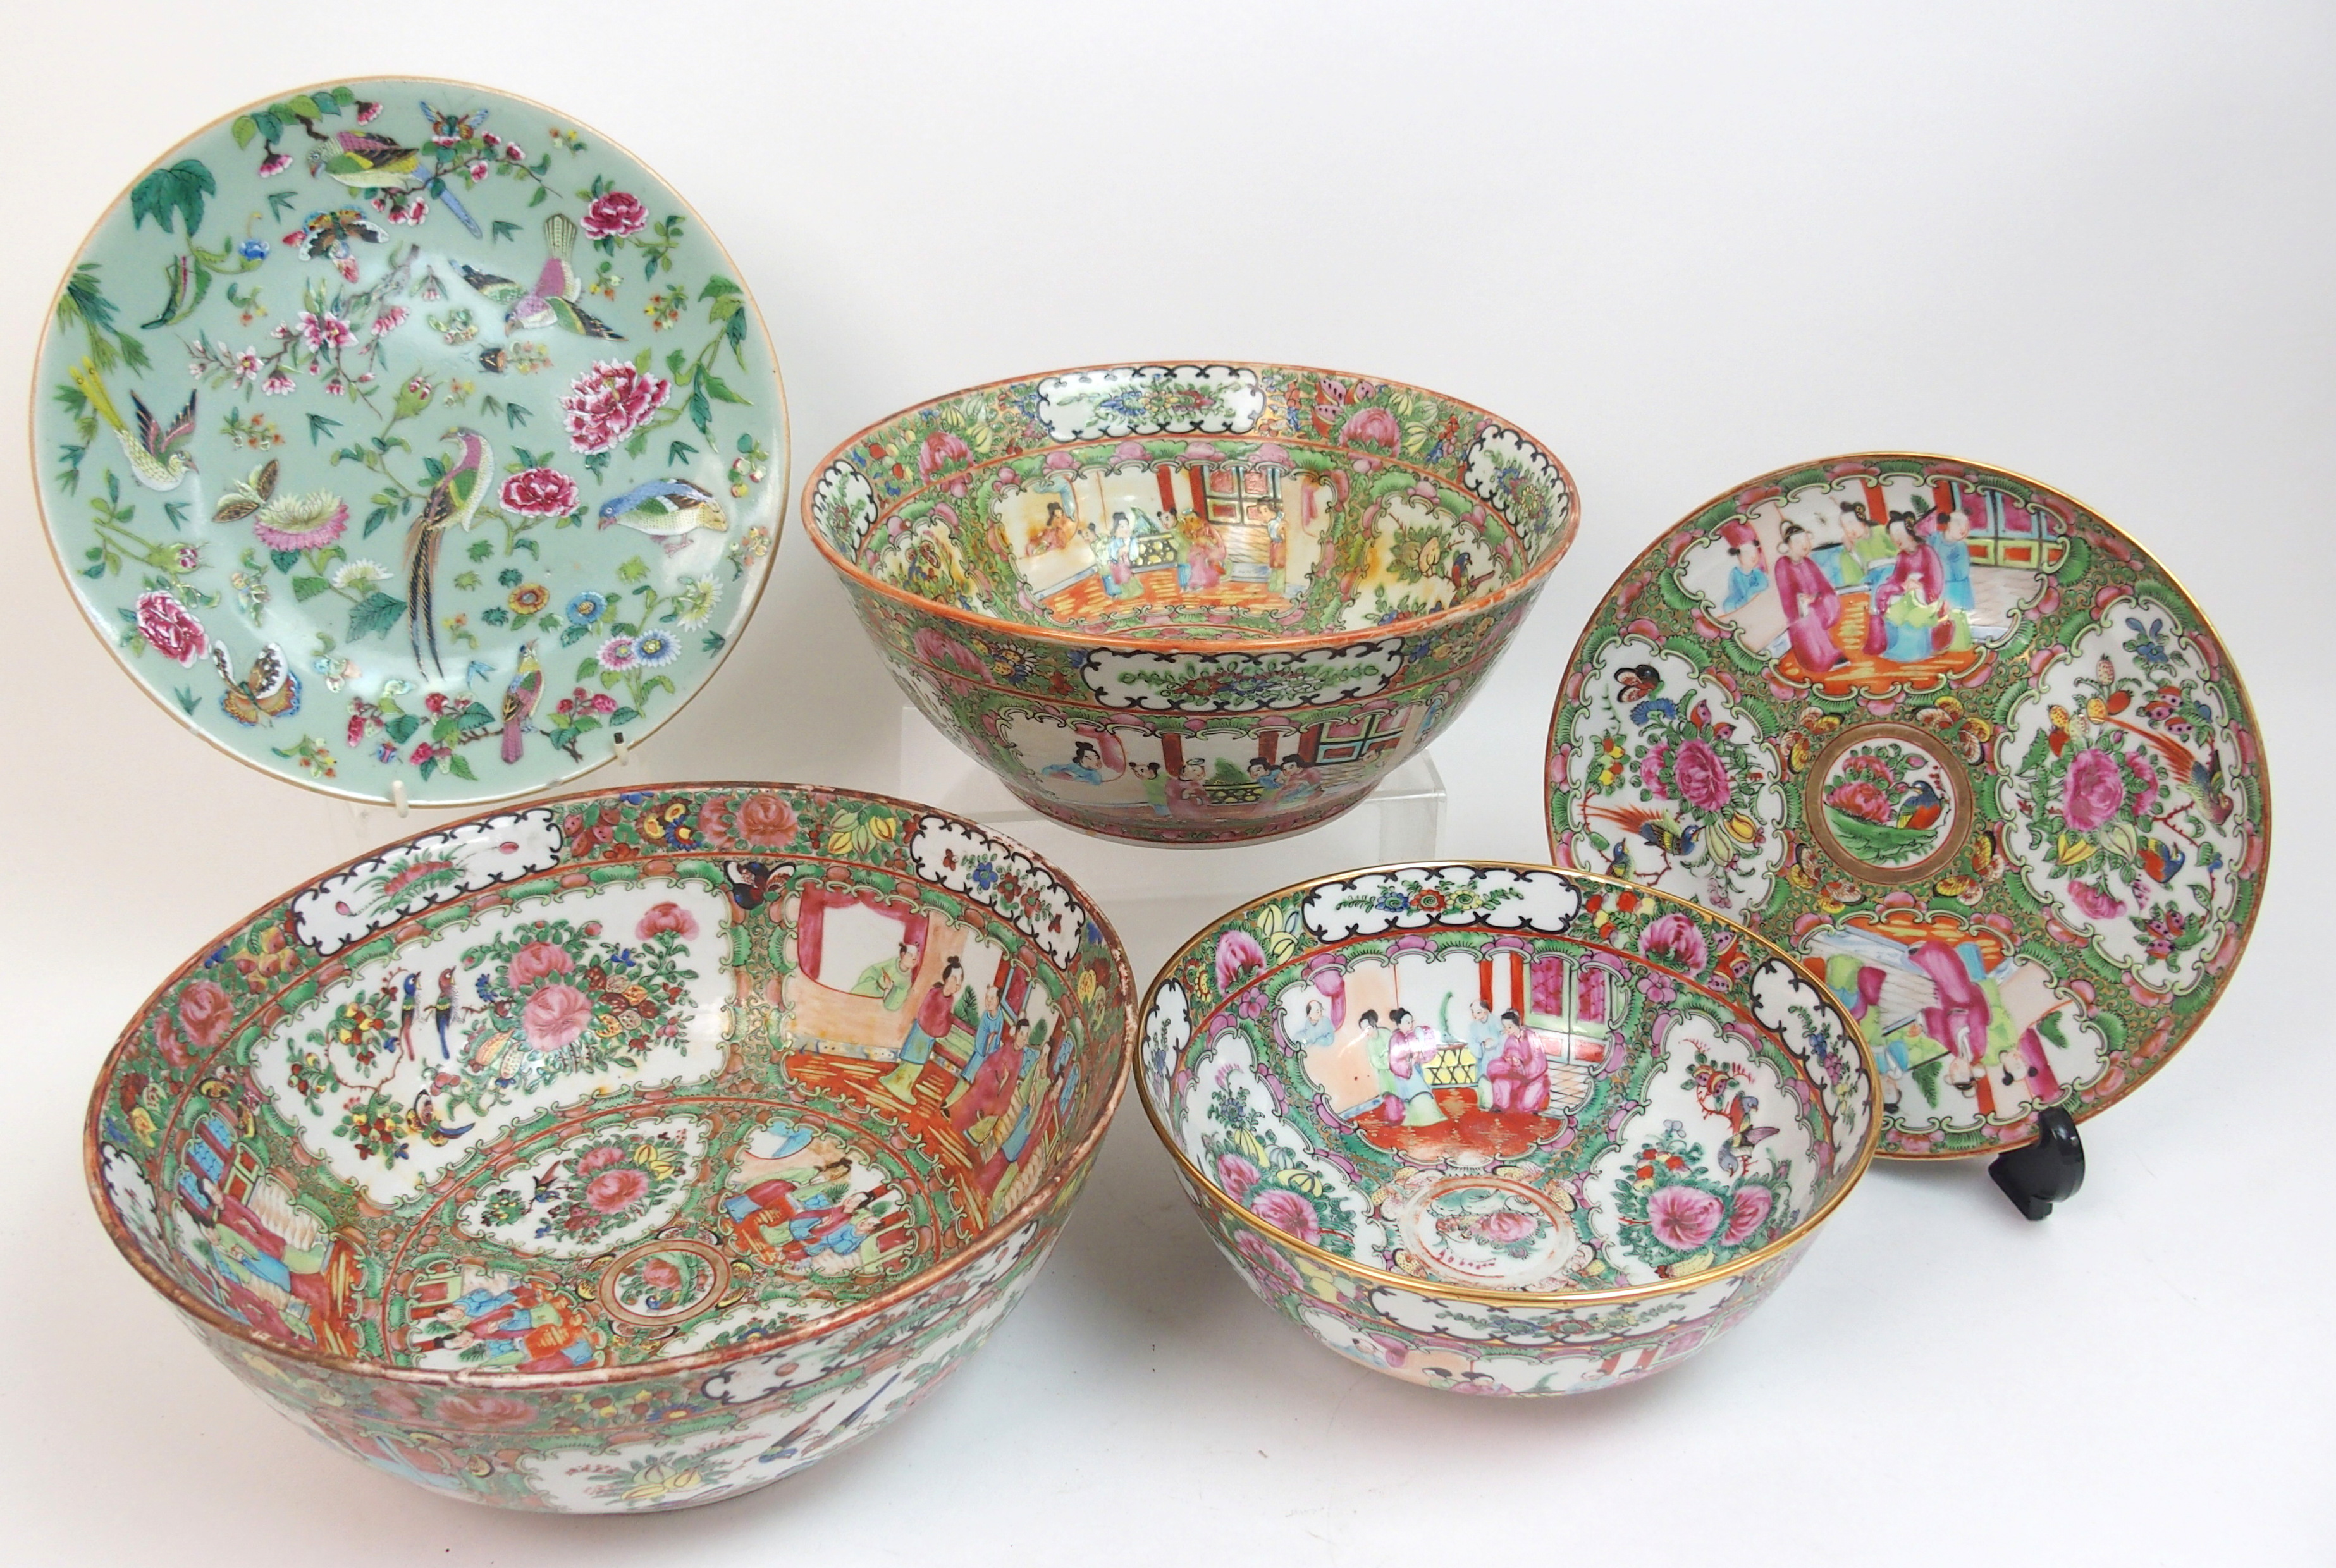 A Canton famille rose punch bowl of traditional design with panels of figures, birds, fruit and